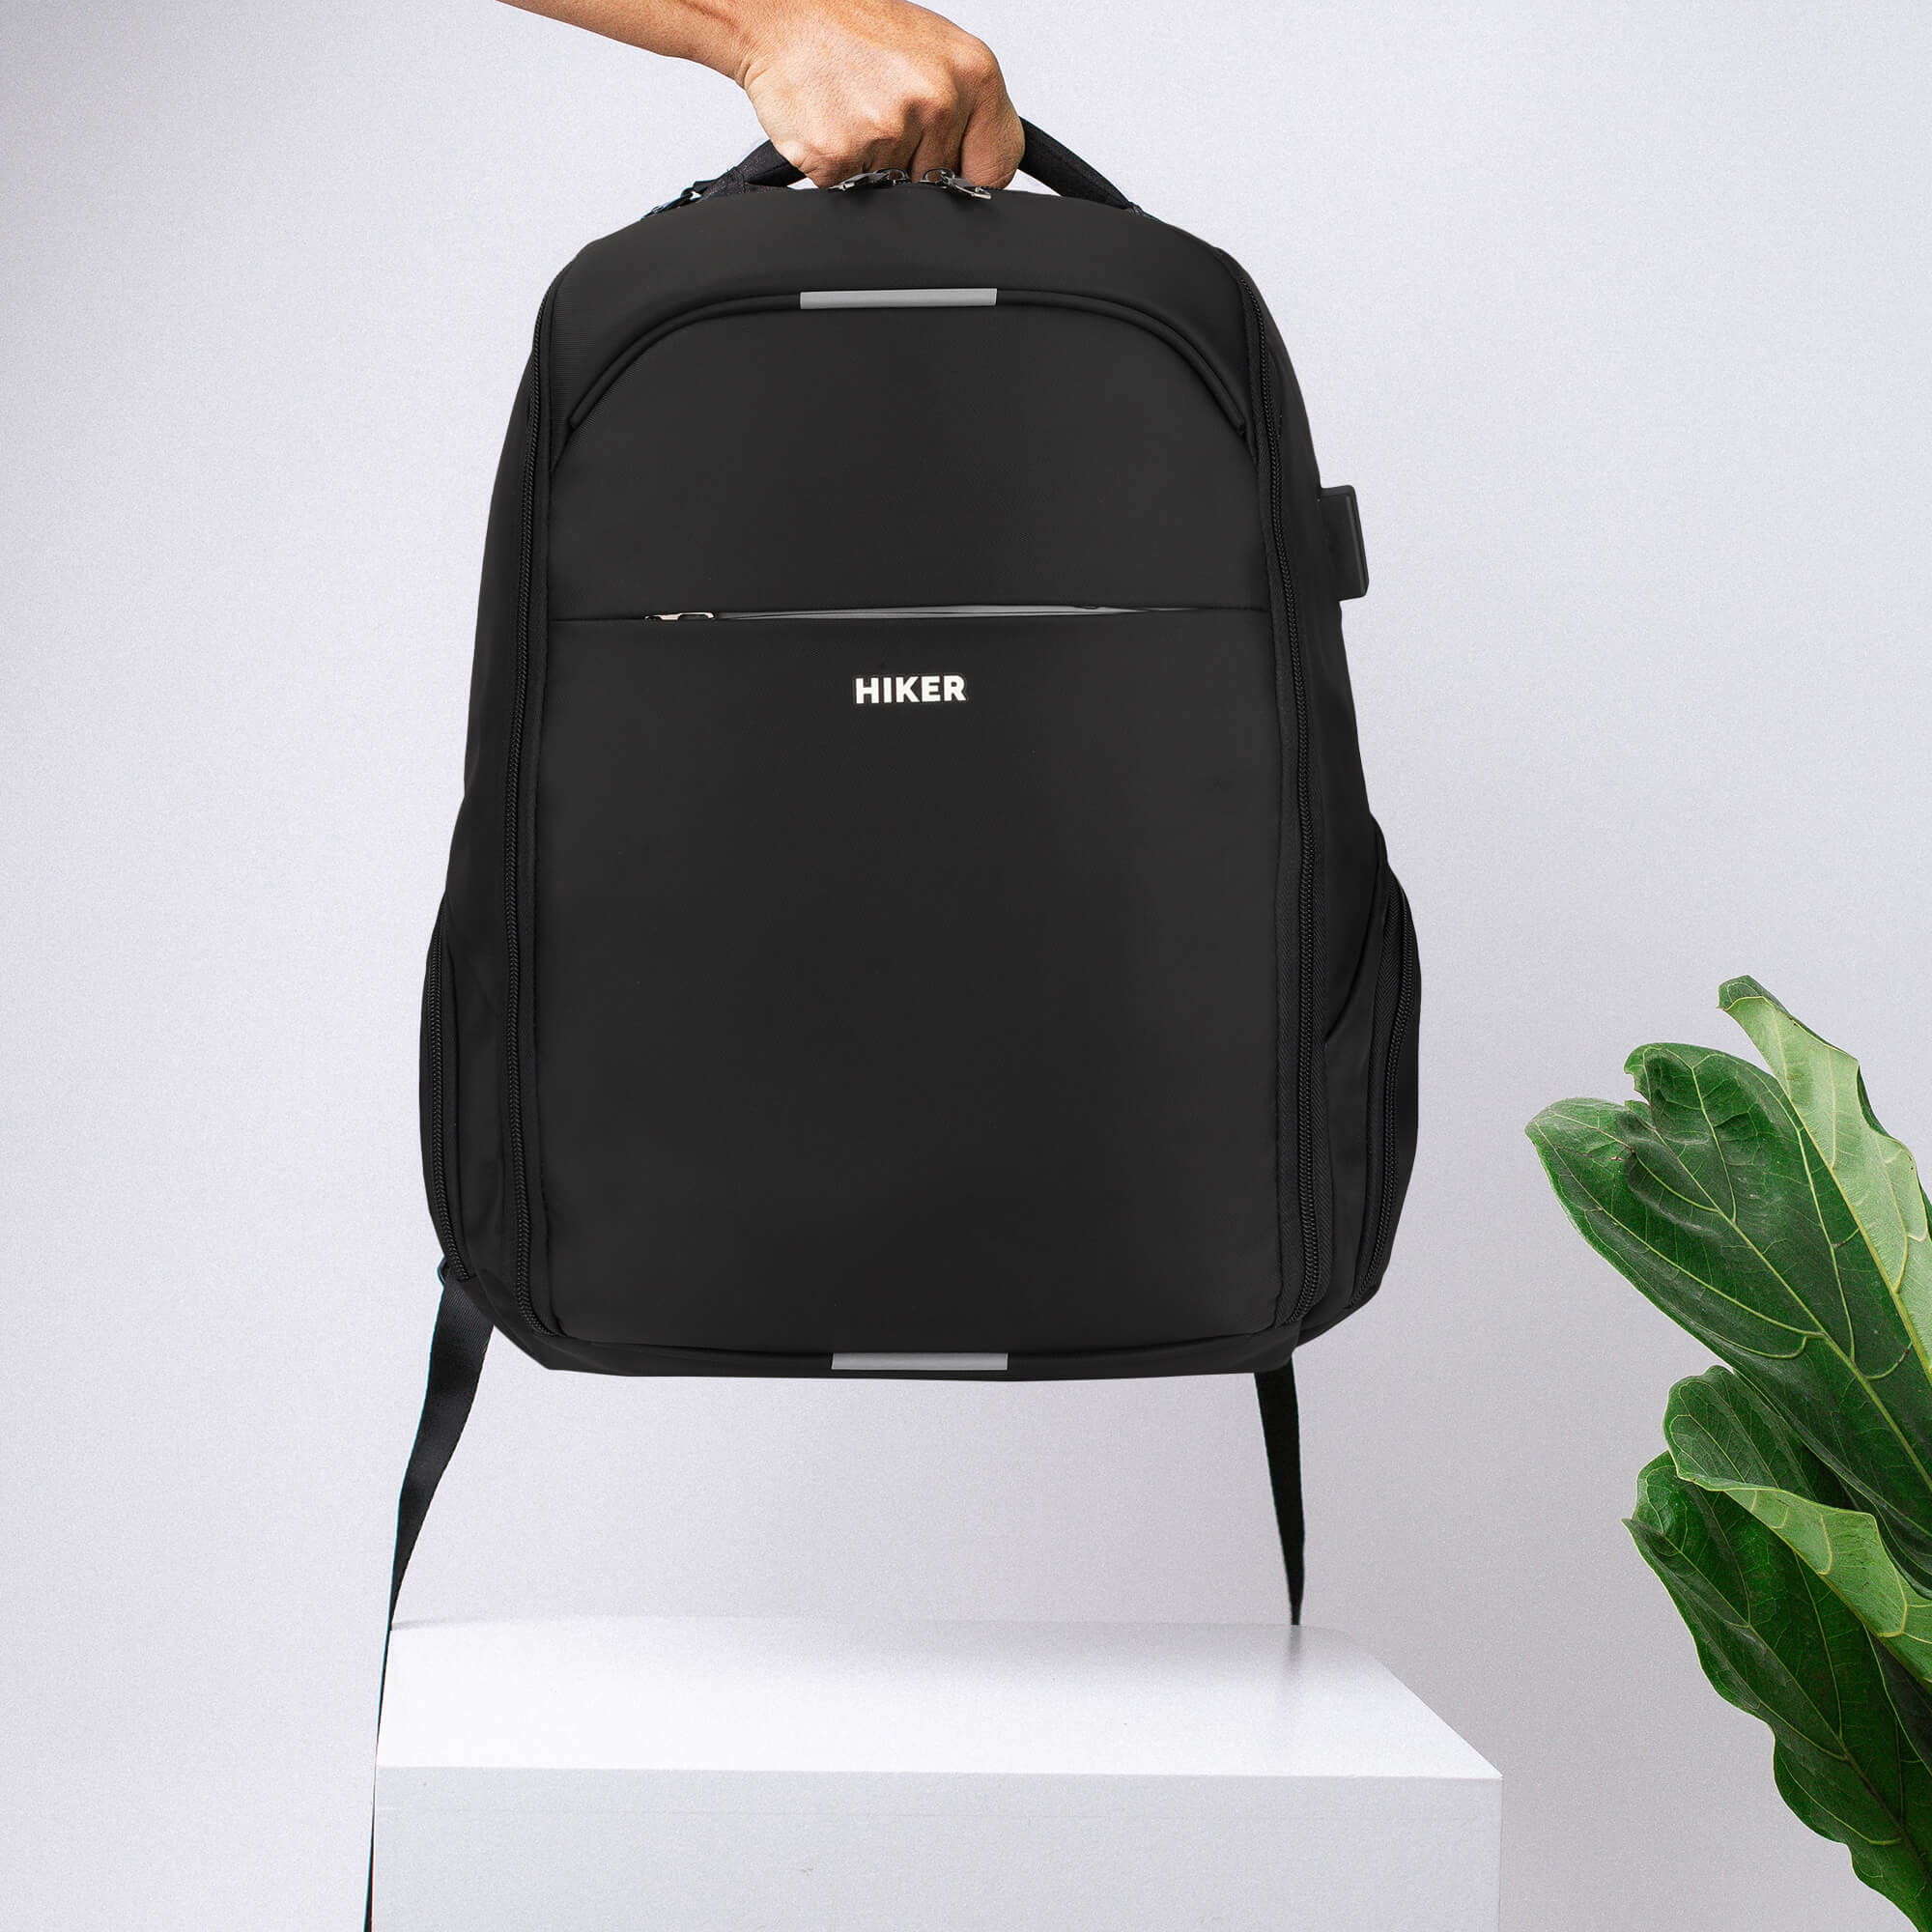 Easy To Carry - Smart Business Backpack